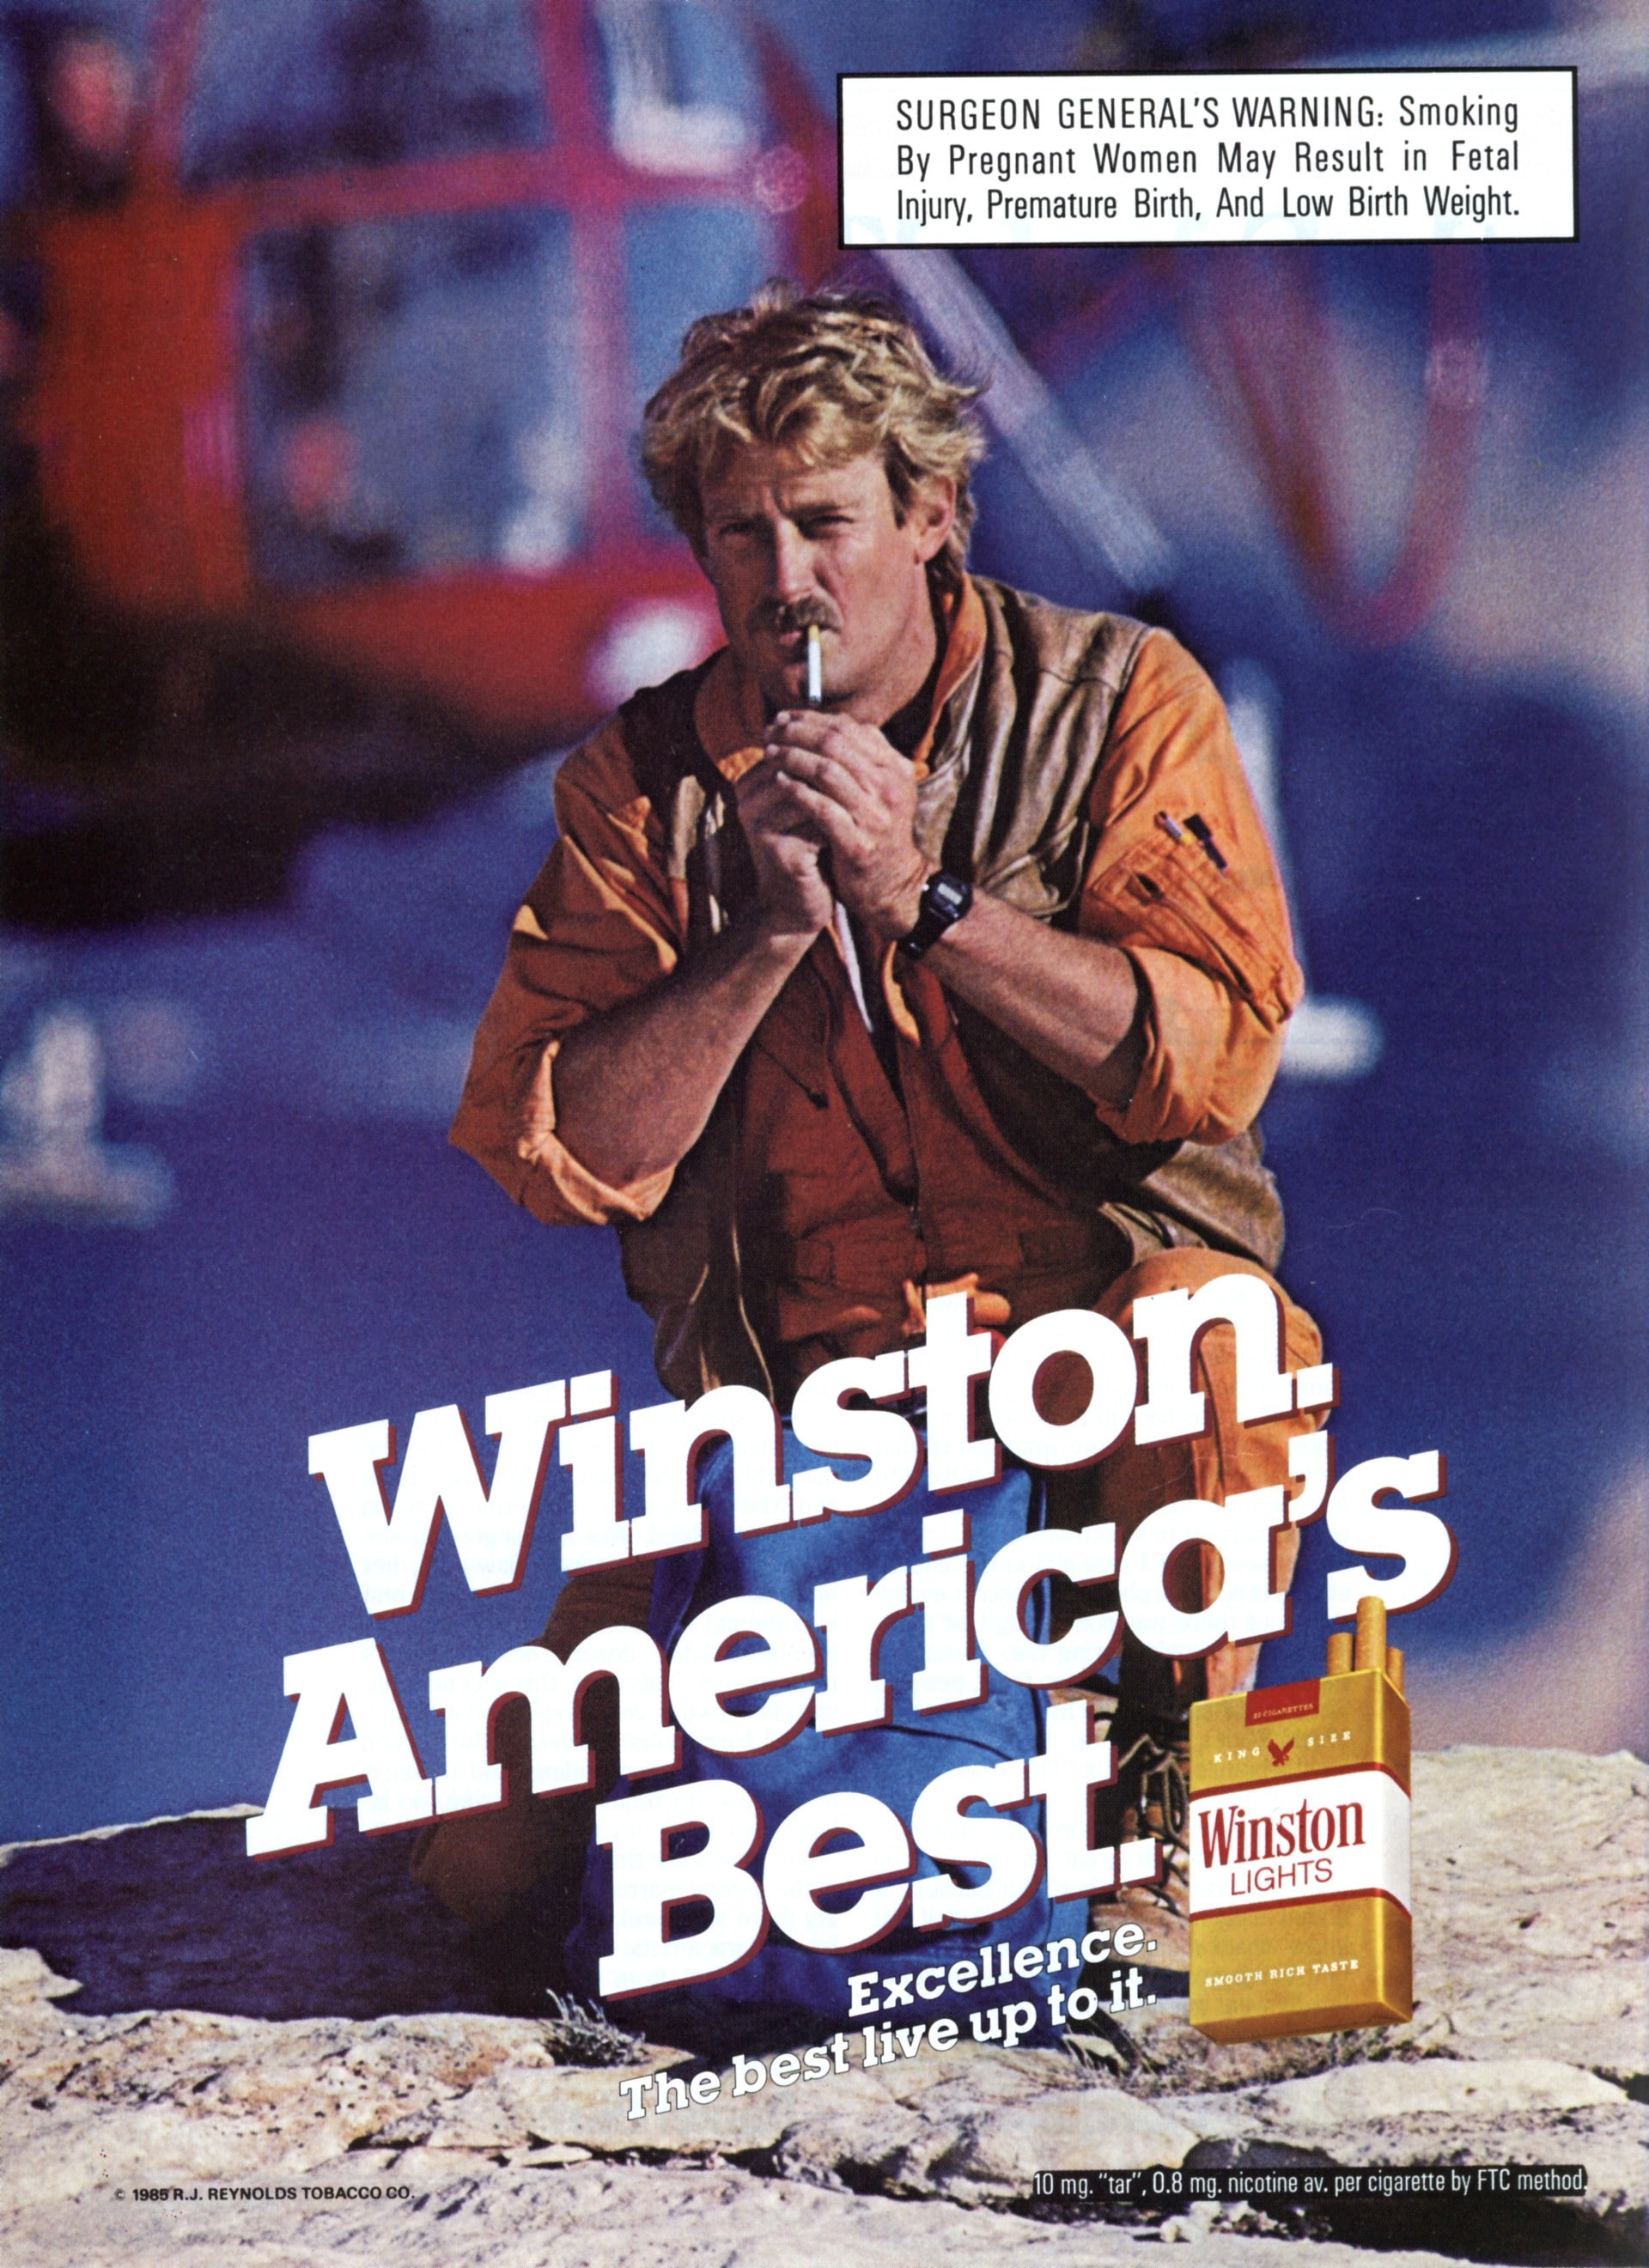 winston light, cigarettes, poster, communication, sign, one person